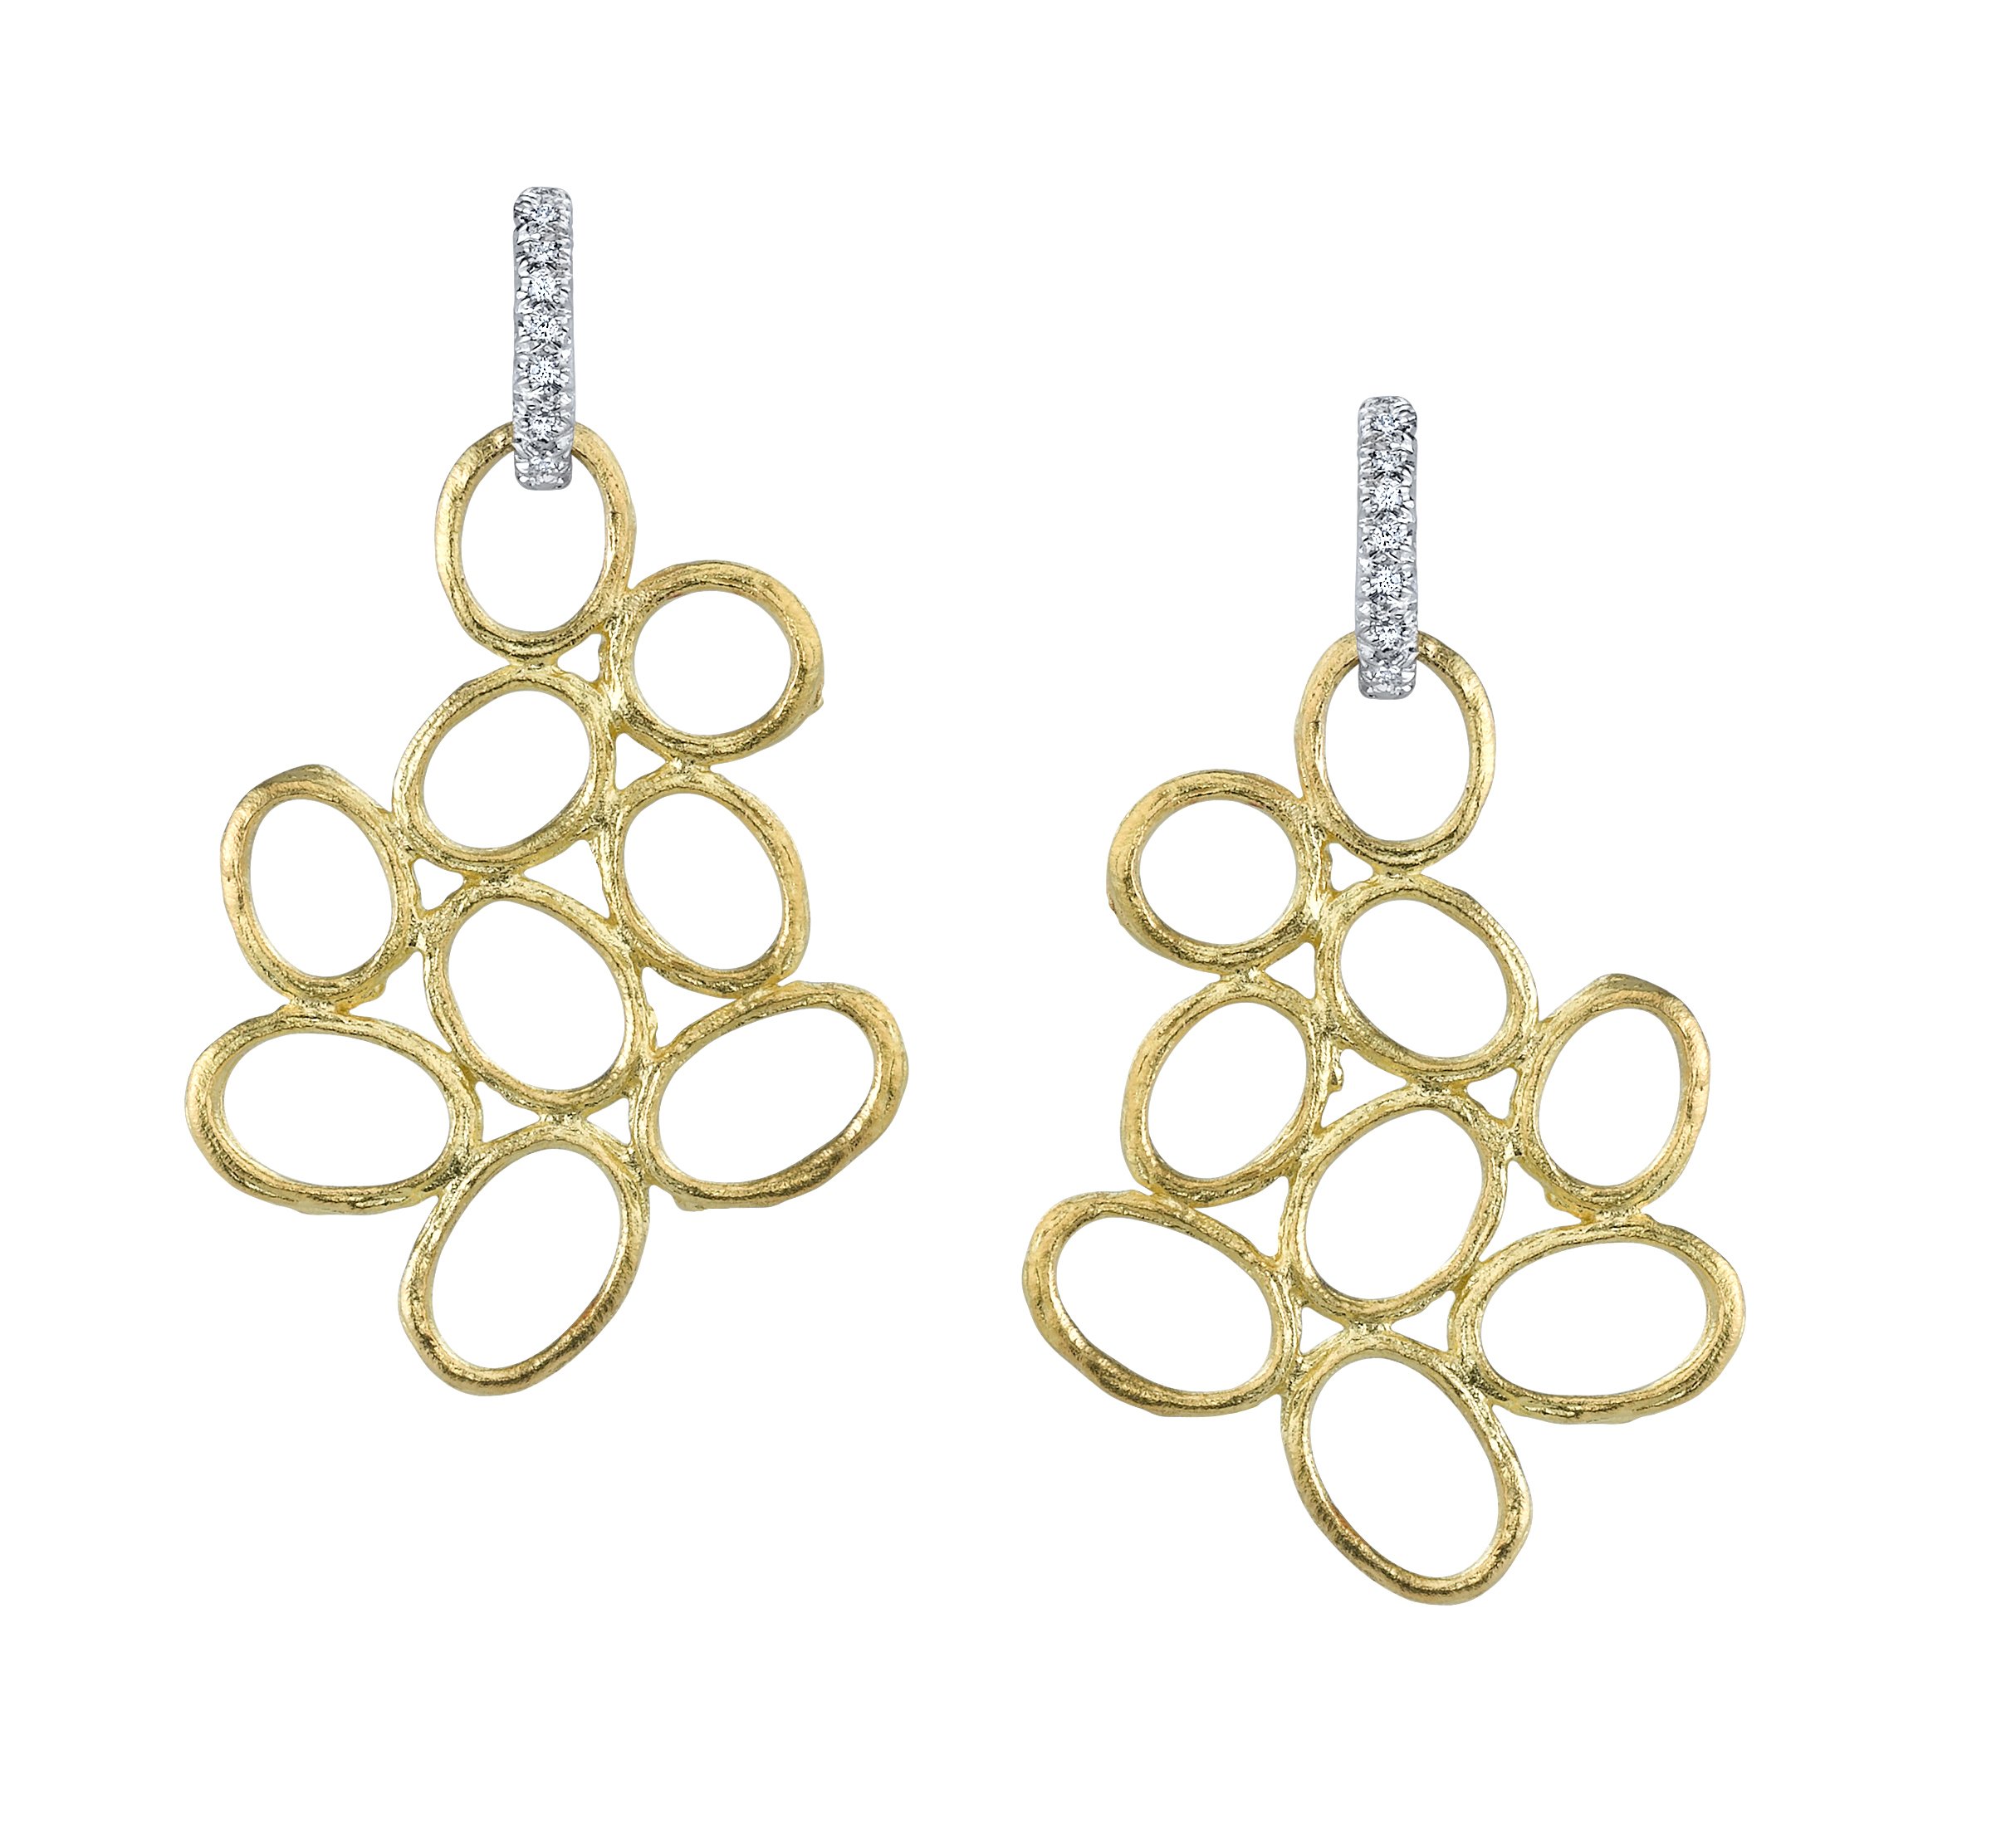 Smaller Free Form Open Olive Branch Earrings Hanging From Diamond Stems in 19kt Yellow Gold